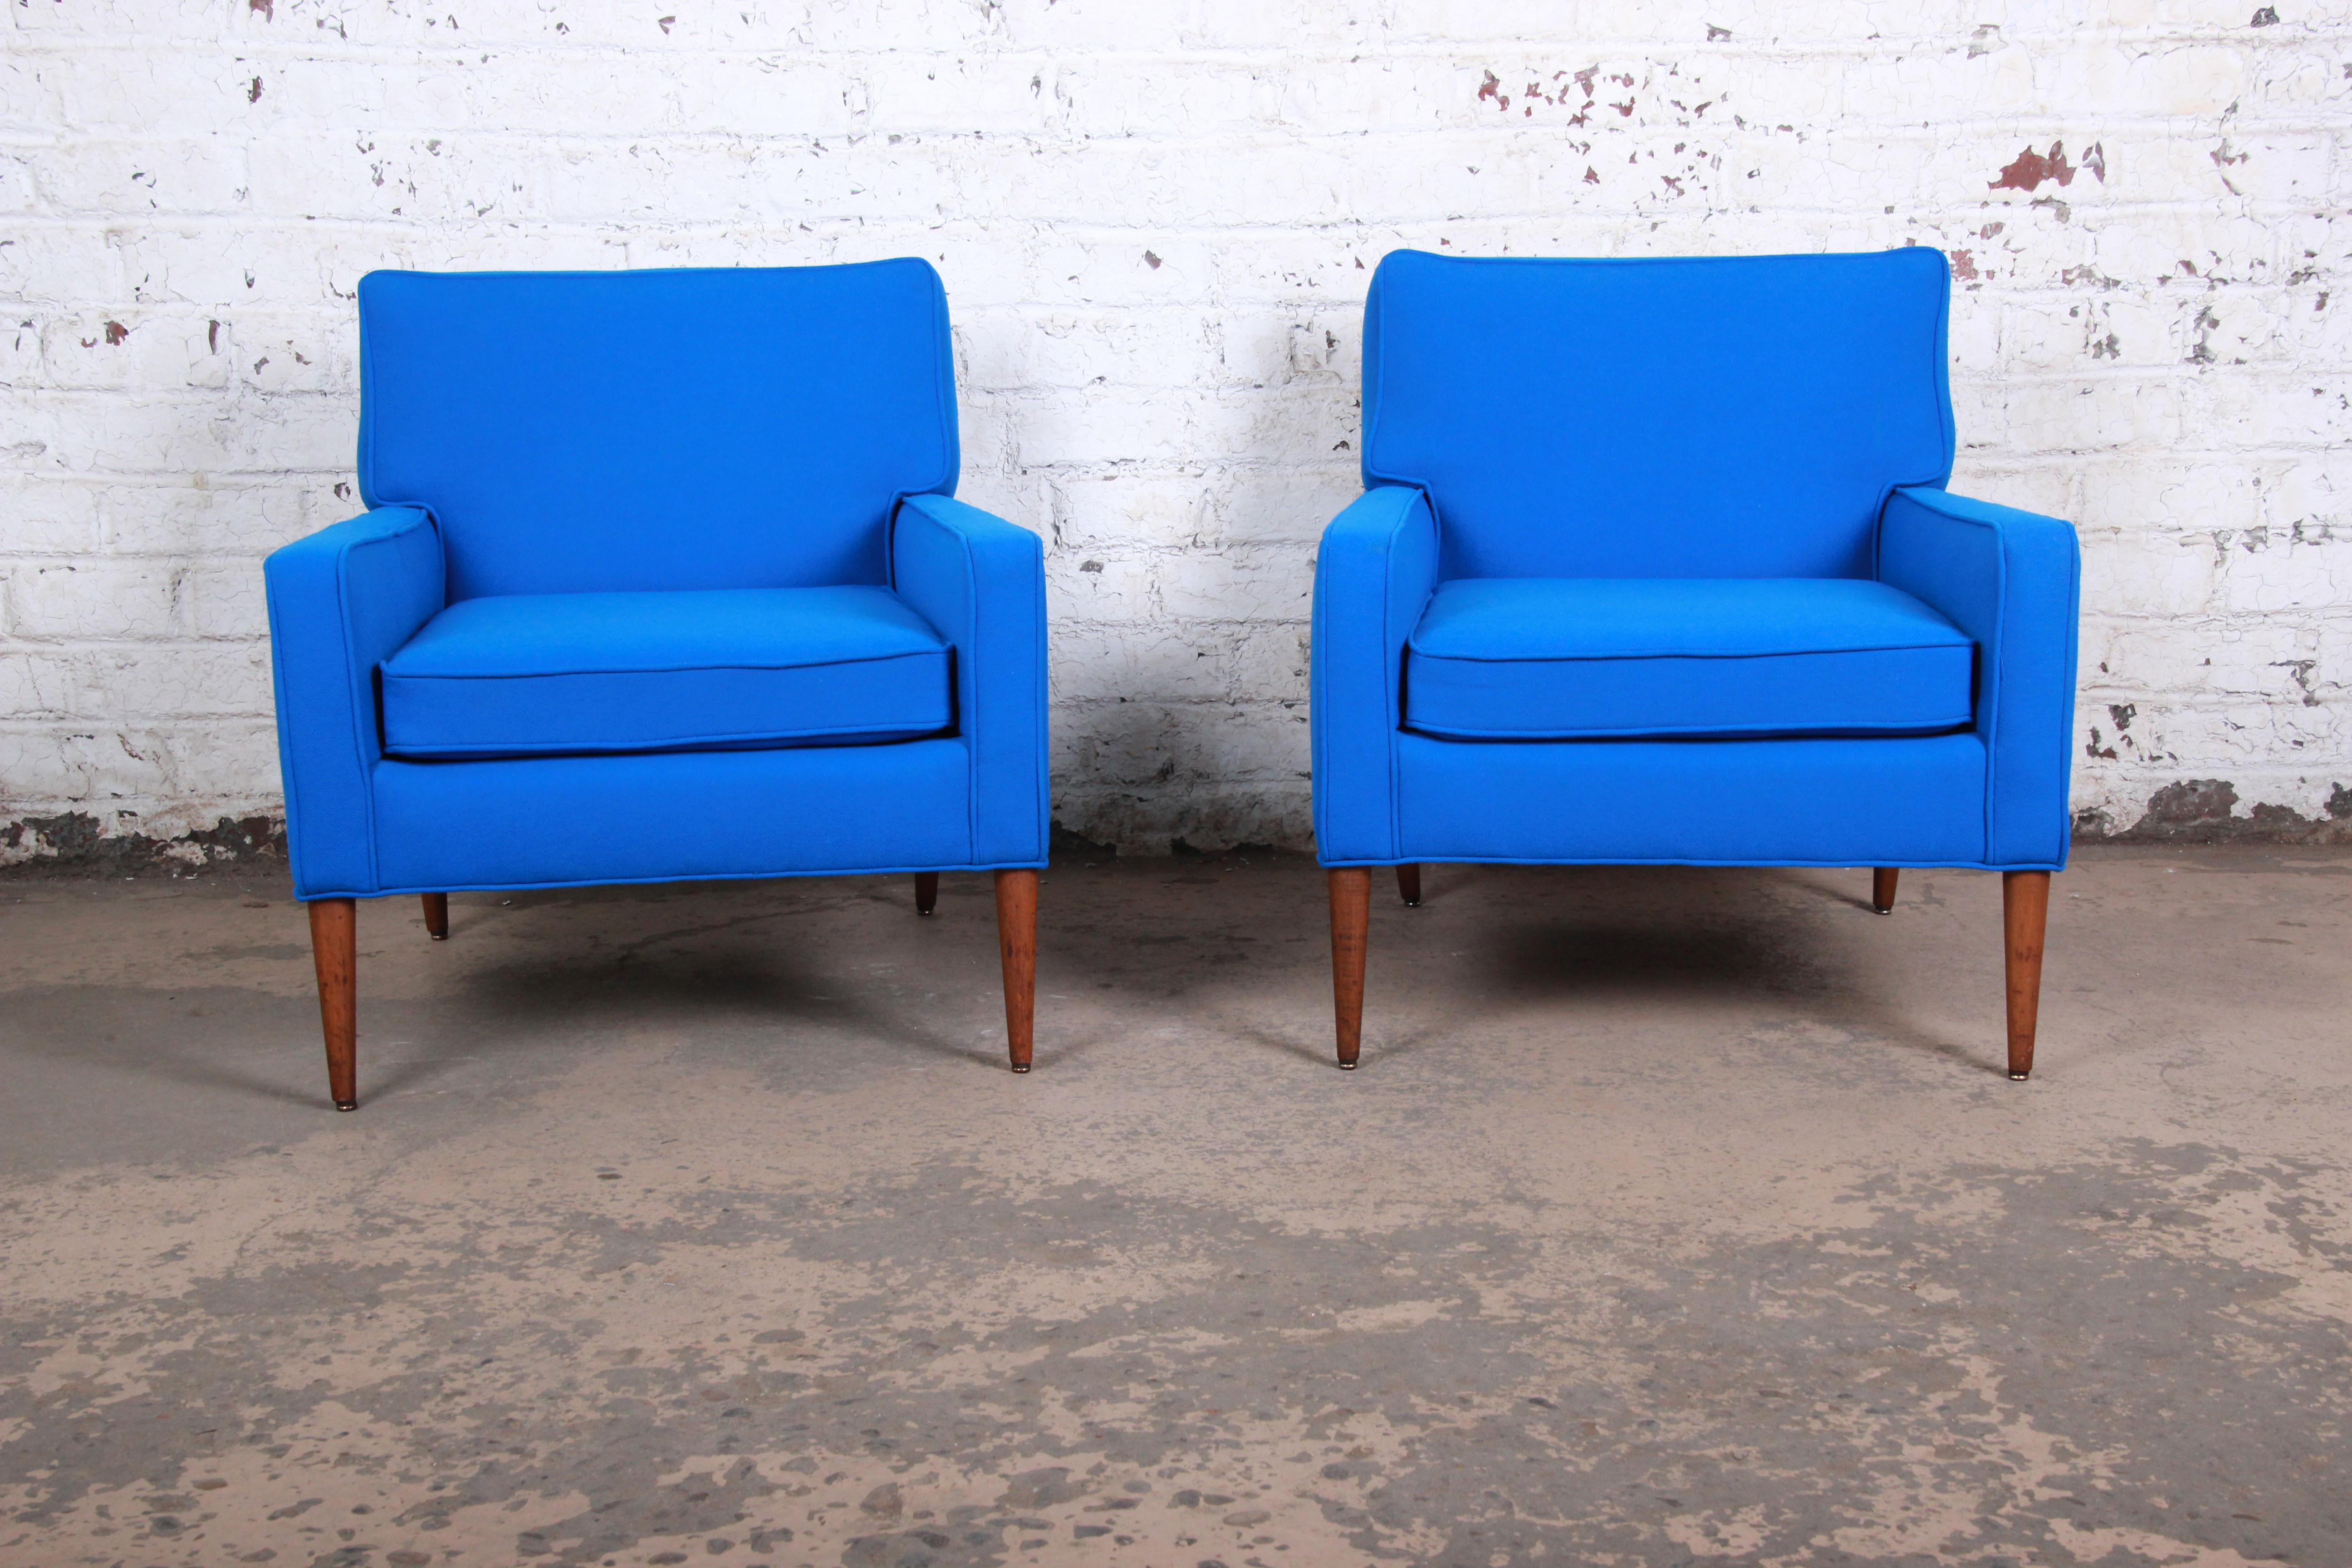 An exceptional pair of Mid-Century Modern lounge chairs designed by Paul McCobb for Directional and produced by Custom Craft. The chairs feature vibrant blue Knoll fabric and sleek solid walnut tapered legs. An excellent example of McCobb's